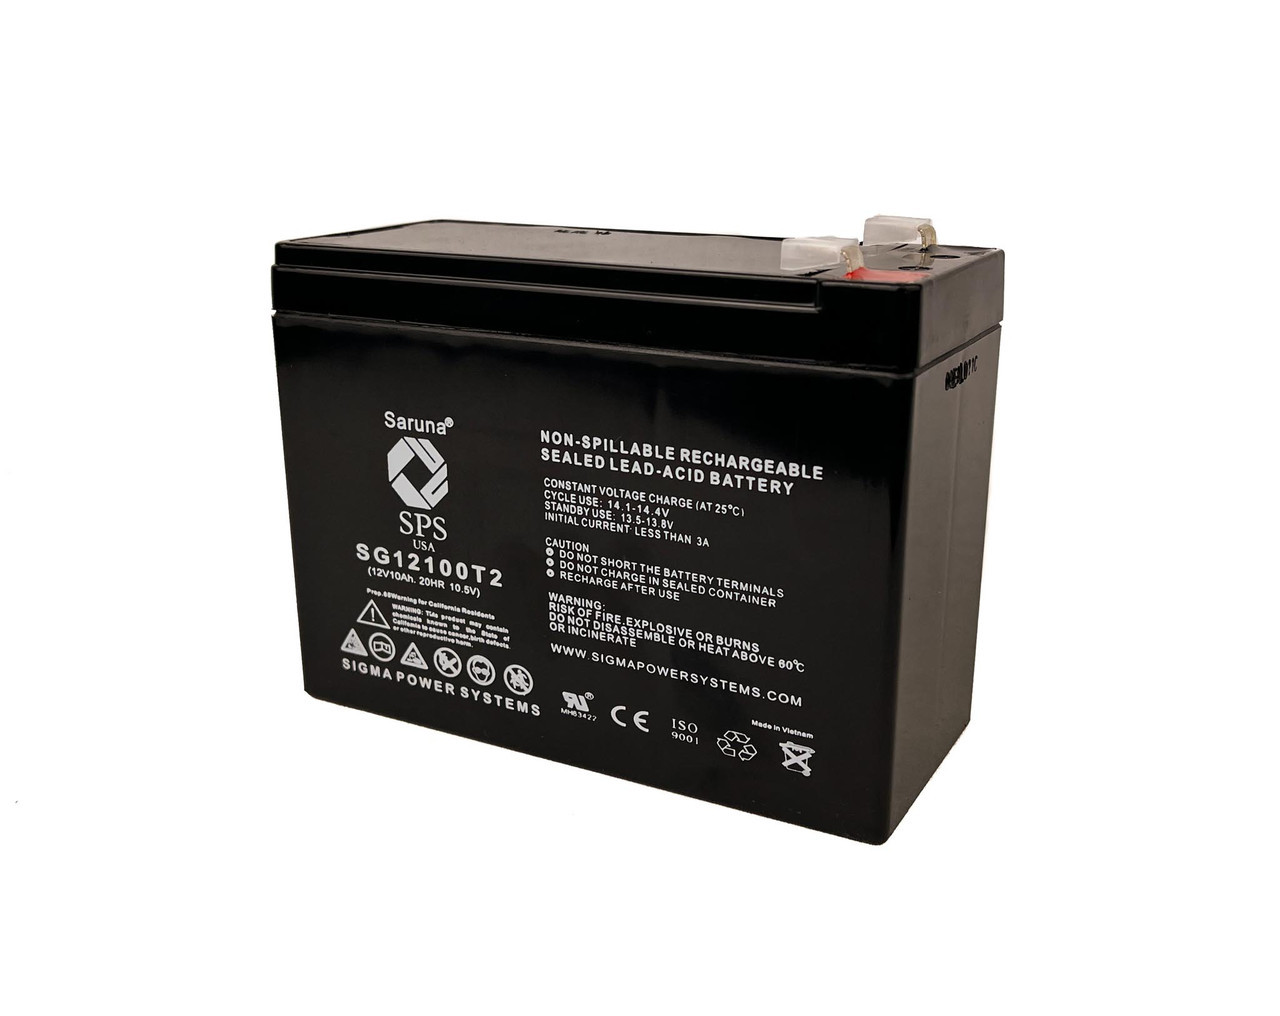 Raion Power 12V 10Ah Non-Spillable Replacement Rechargebale Battery for Werker WKA12-10F2